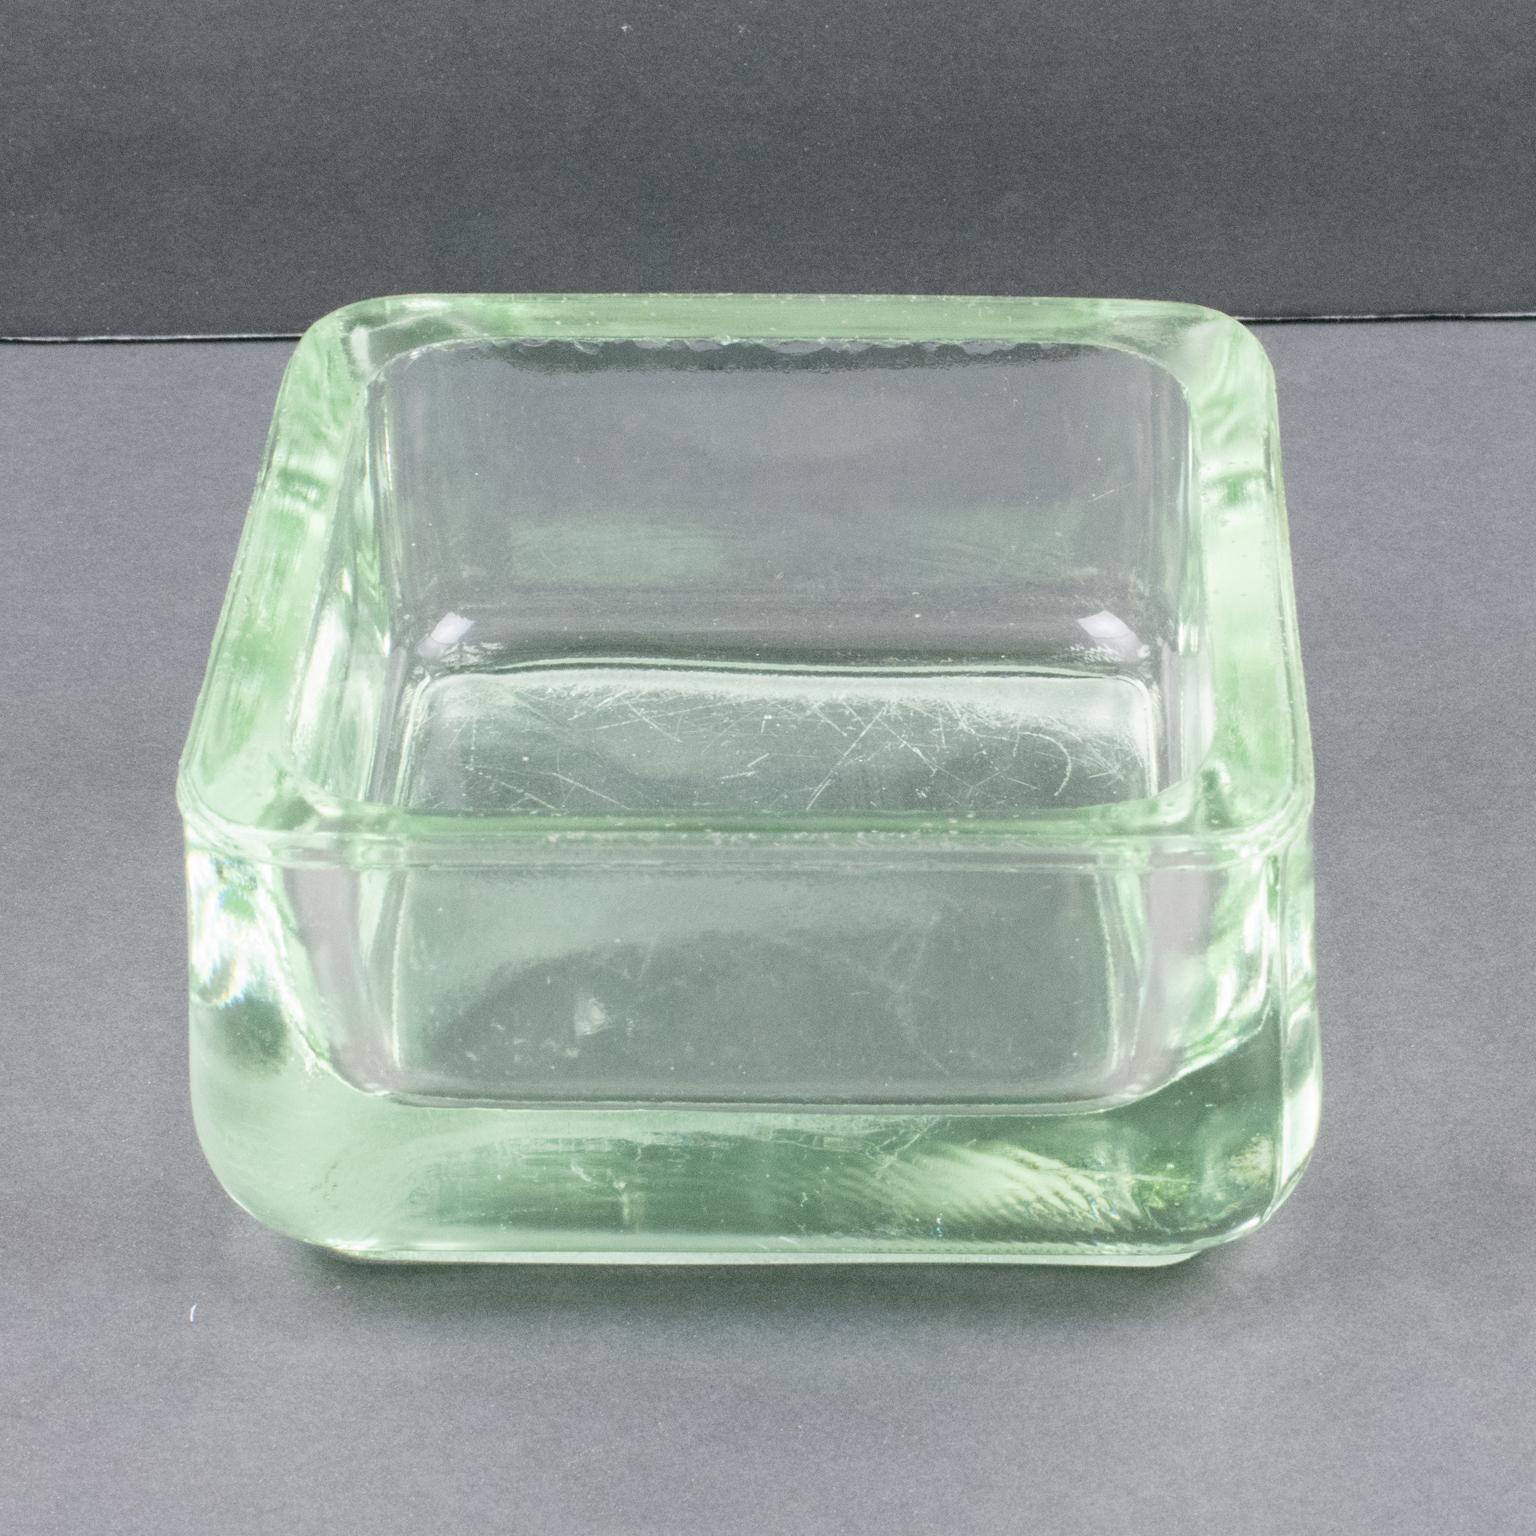 Designed by Le Corbusier for Lumax Molded Glass Desk Accessory Ashtray Catchall 2